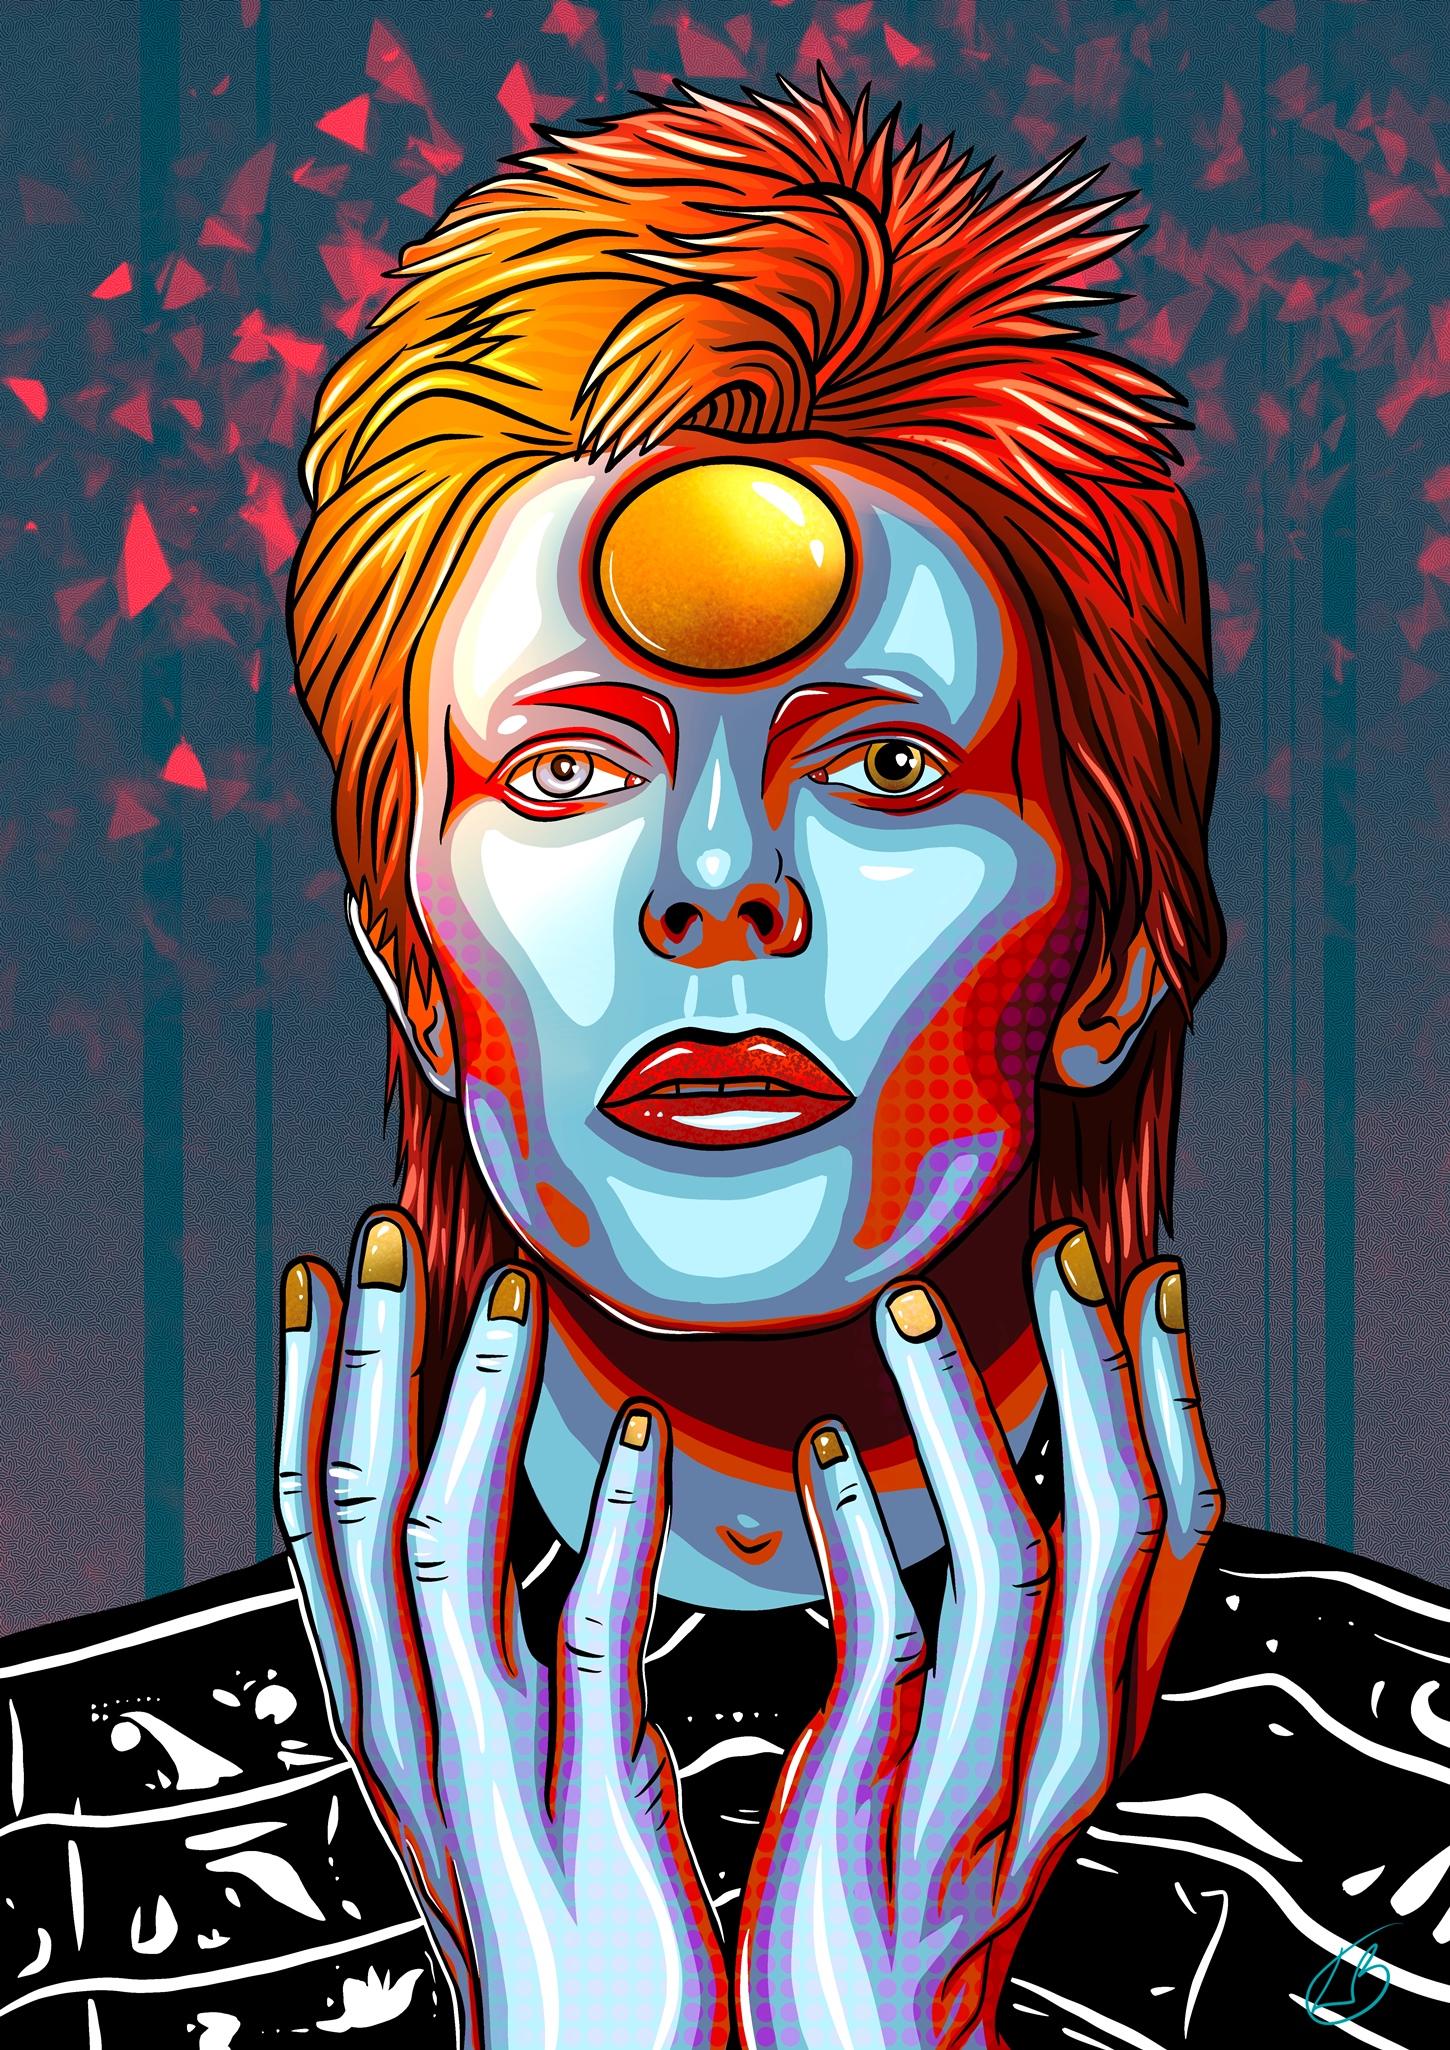 A digital painting in the form of pop art by Lily Bourne of David Bowie from his Ziggy Starduct period. Orange and blue coloured.